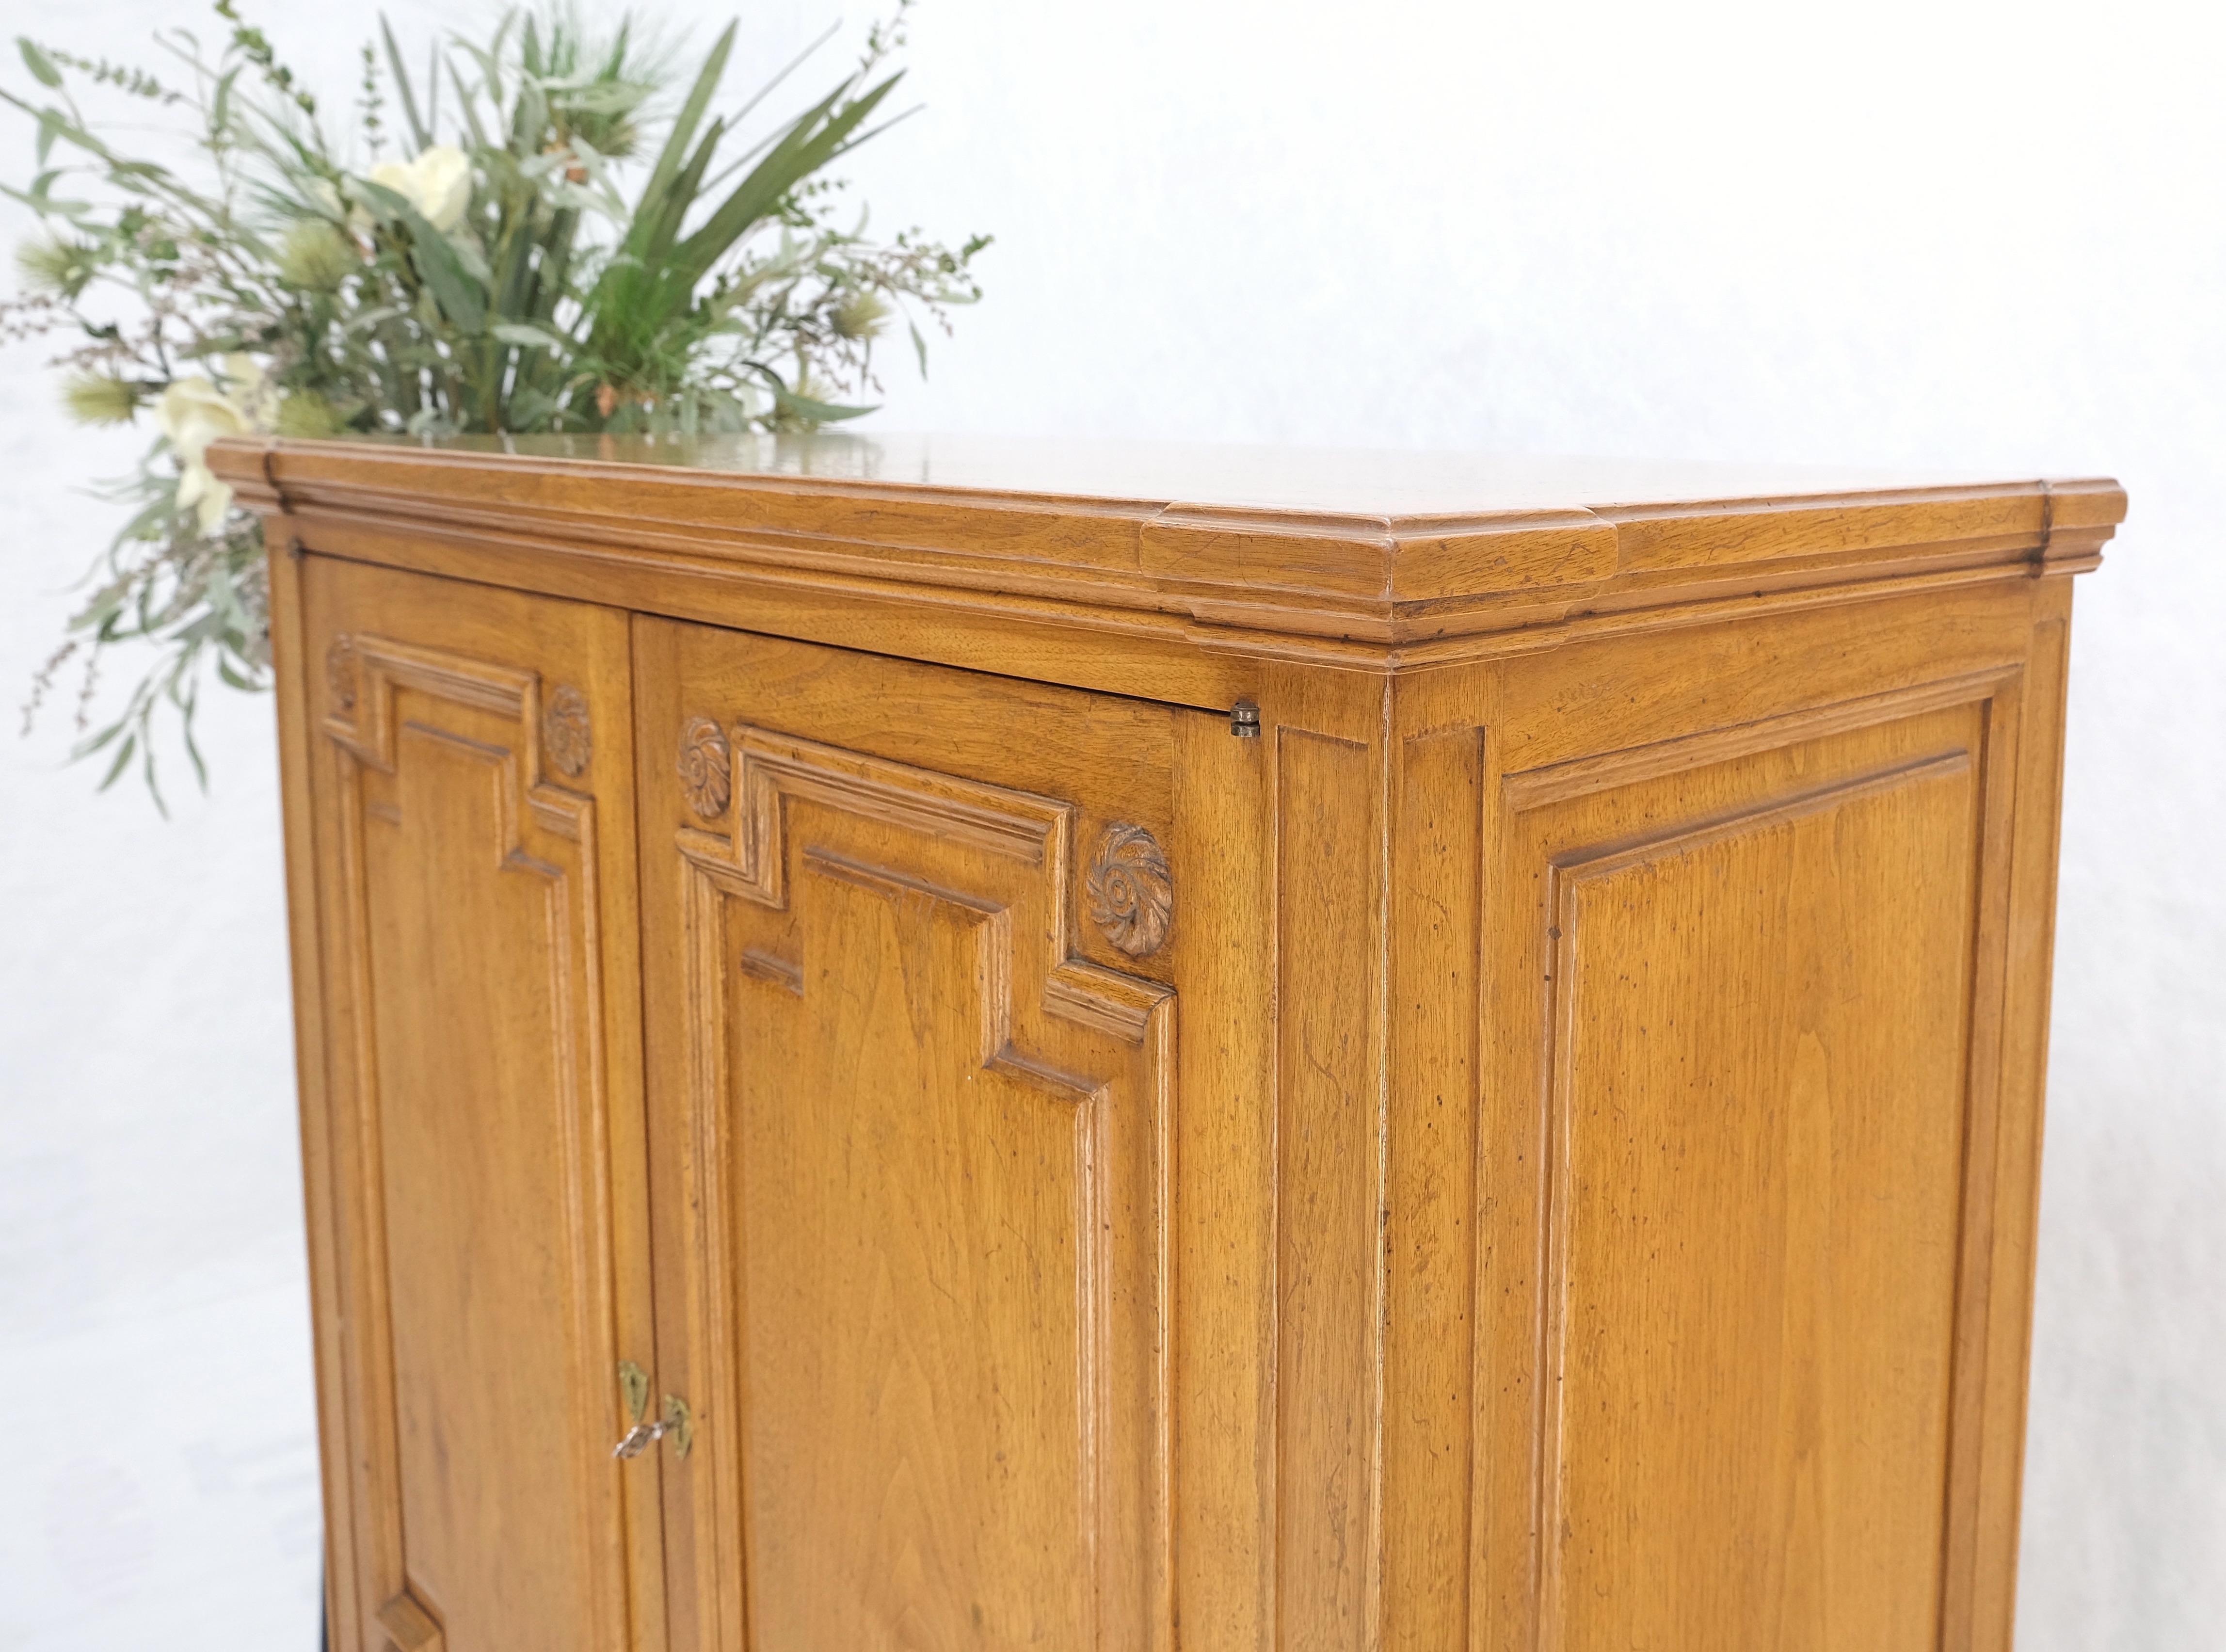 Lacquered Superior Quality Raised Panel High Chest Dresser Cabinet Dresser MINT! For Sale